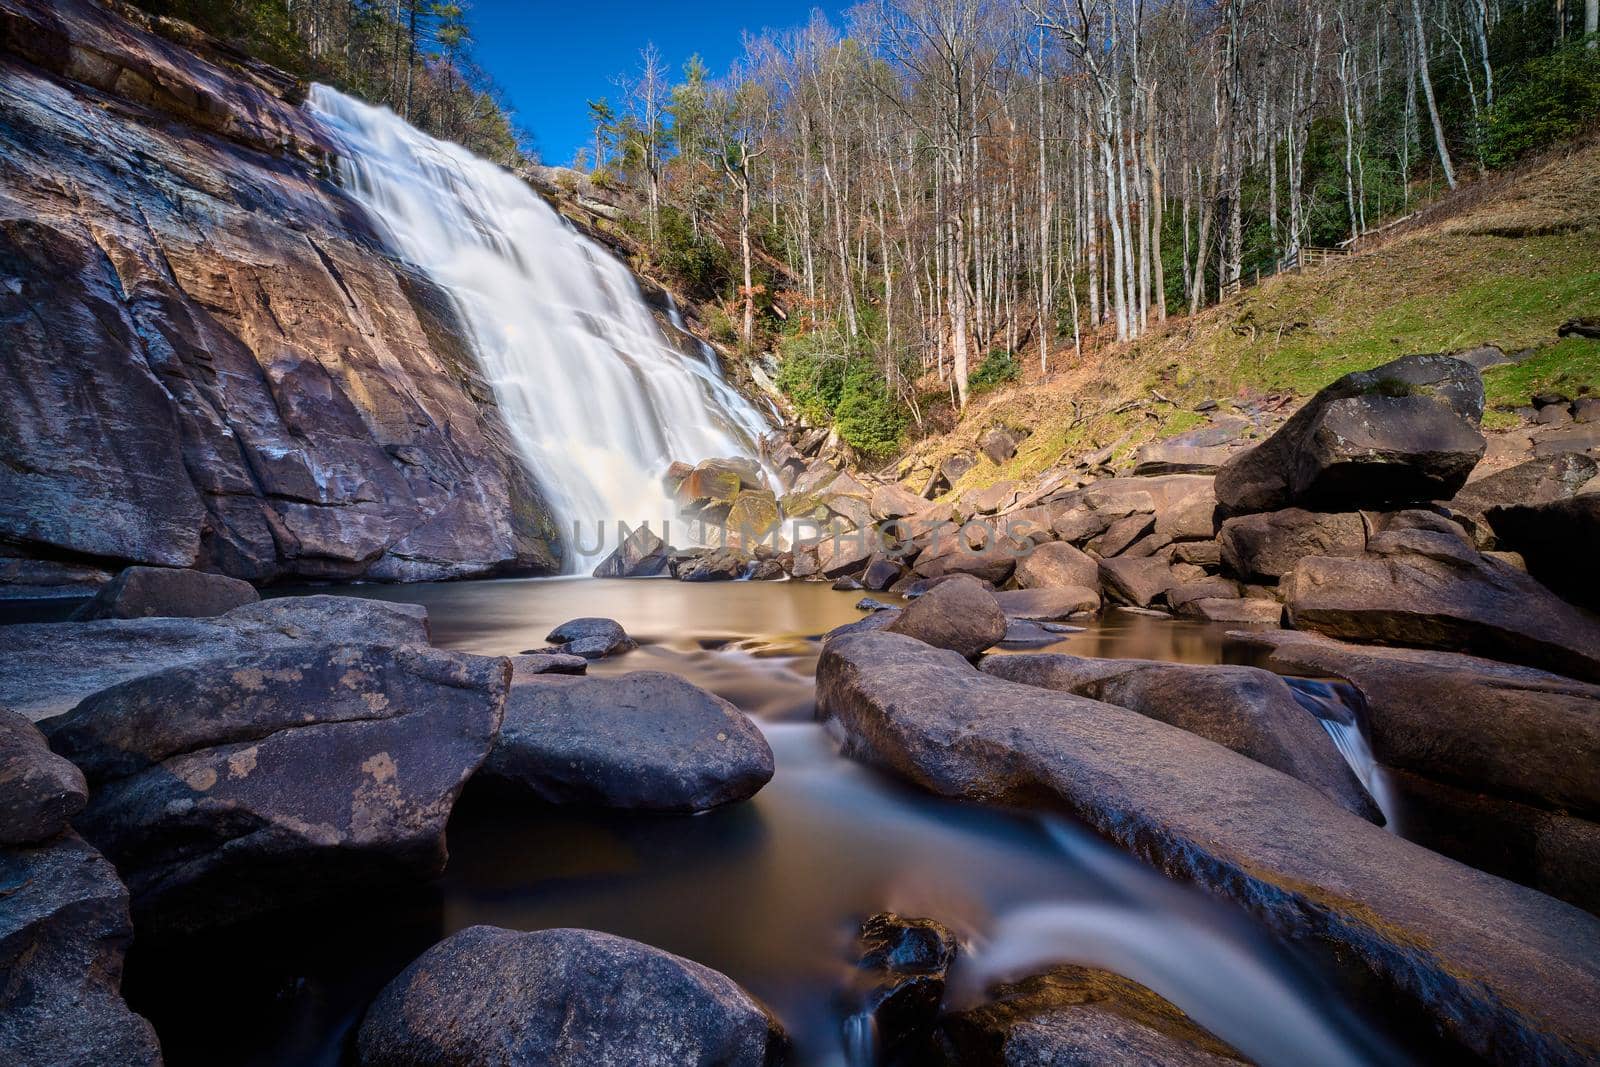 Rainbow Falls in Gorges State Park near Sapphire in North Carolina, USA by patrickstock